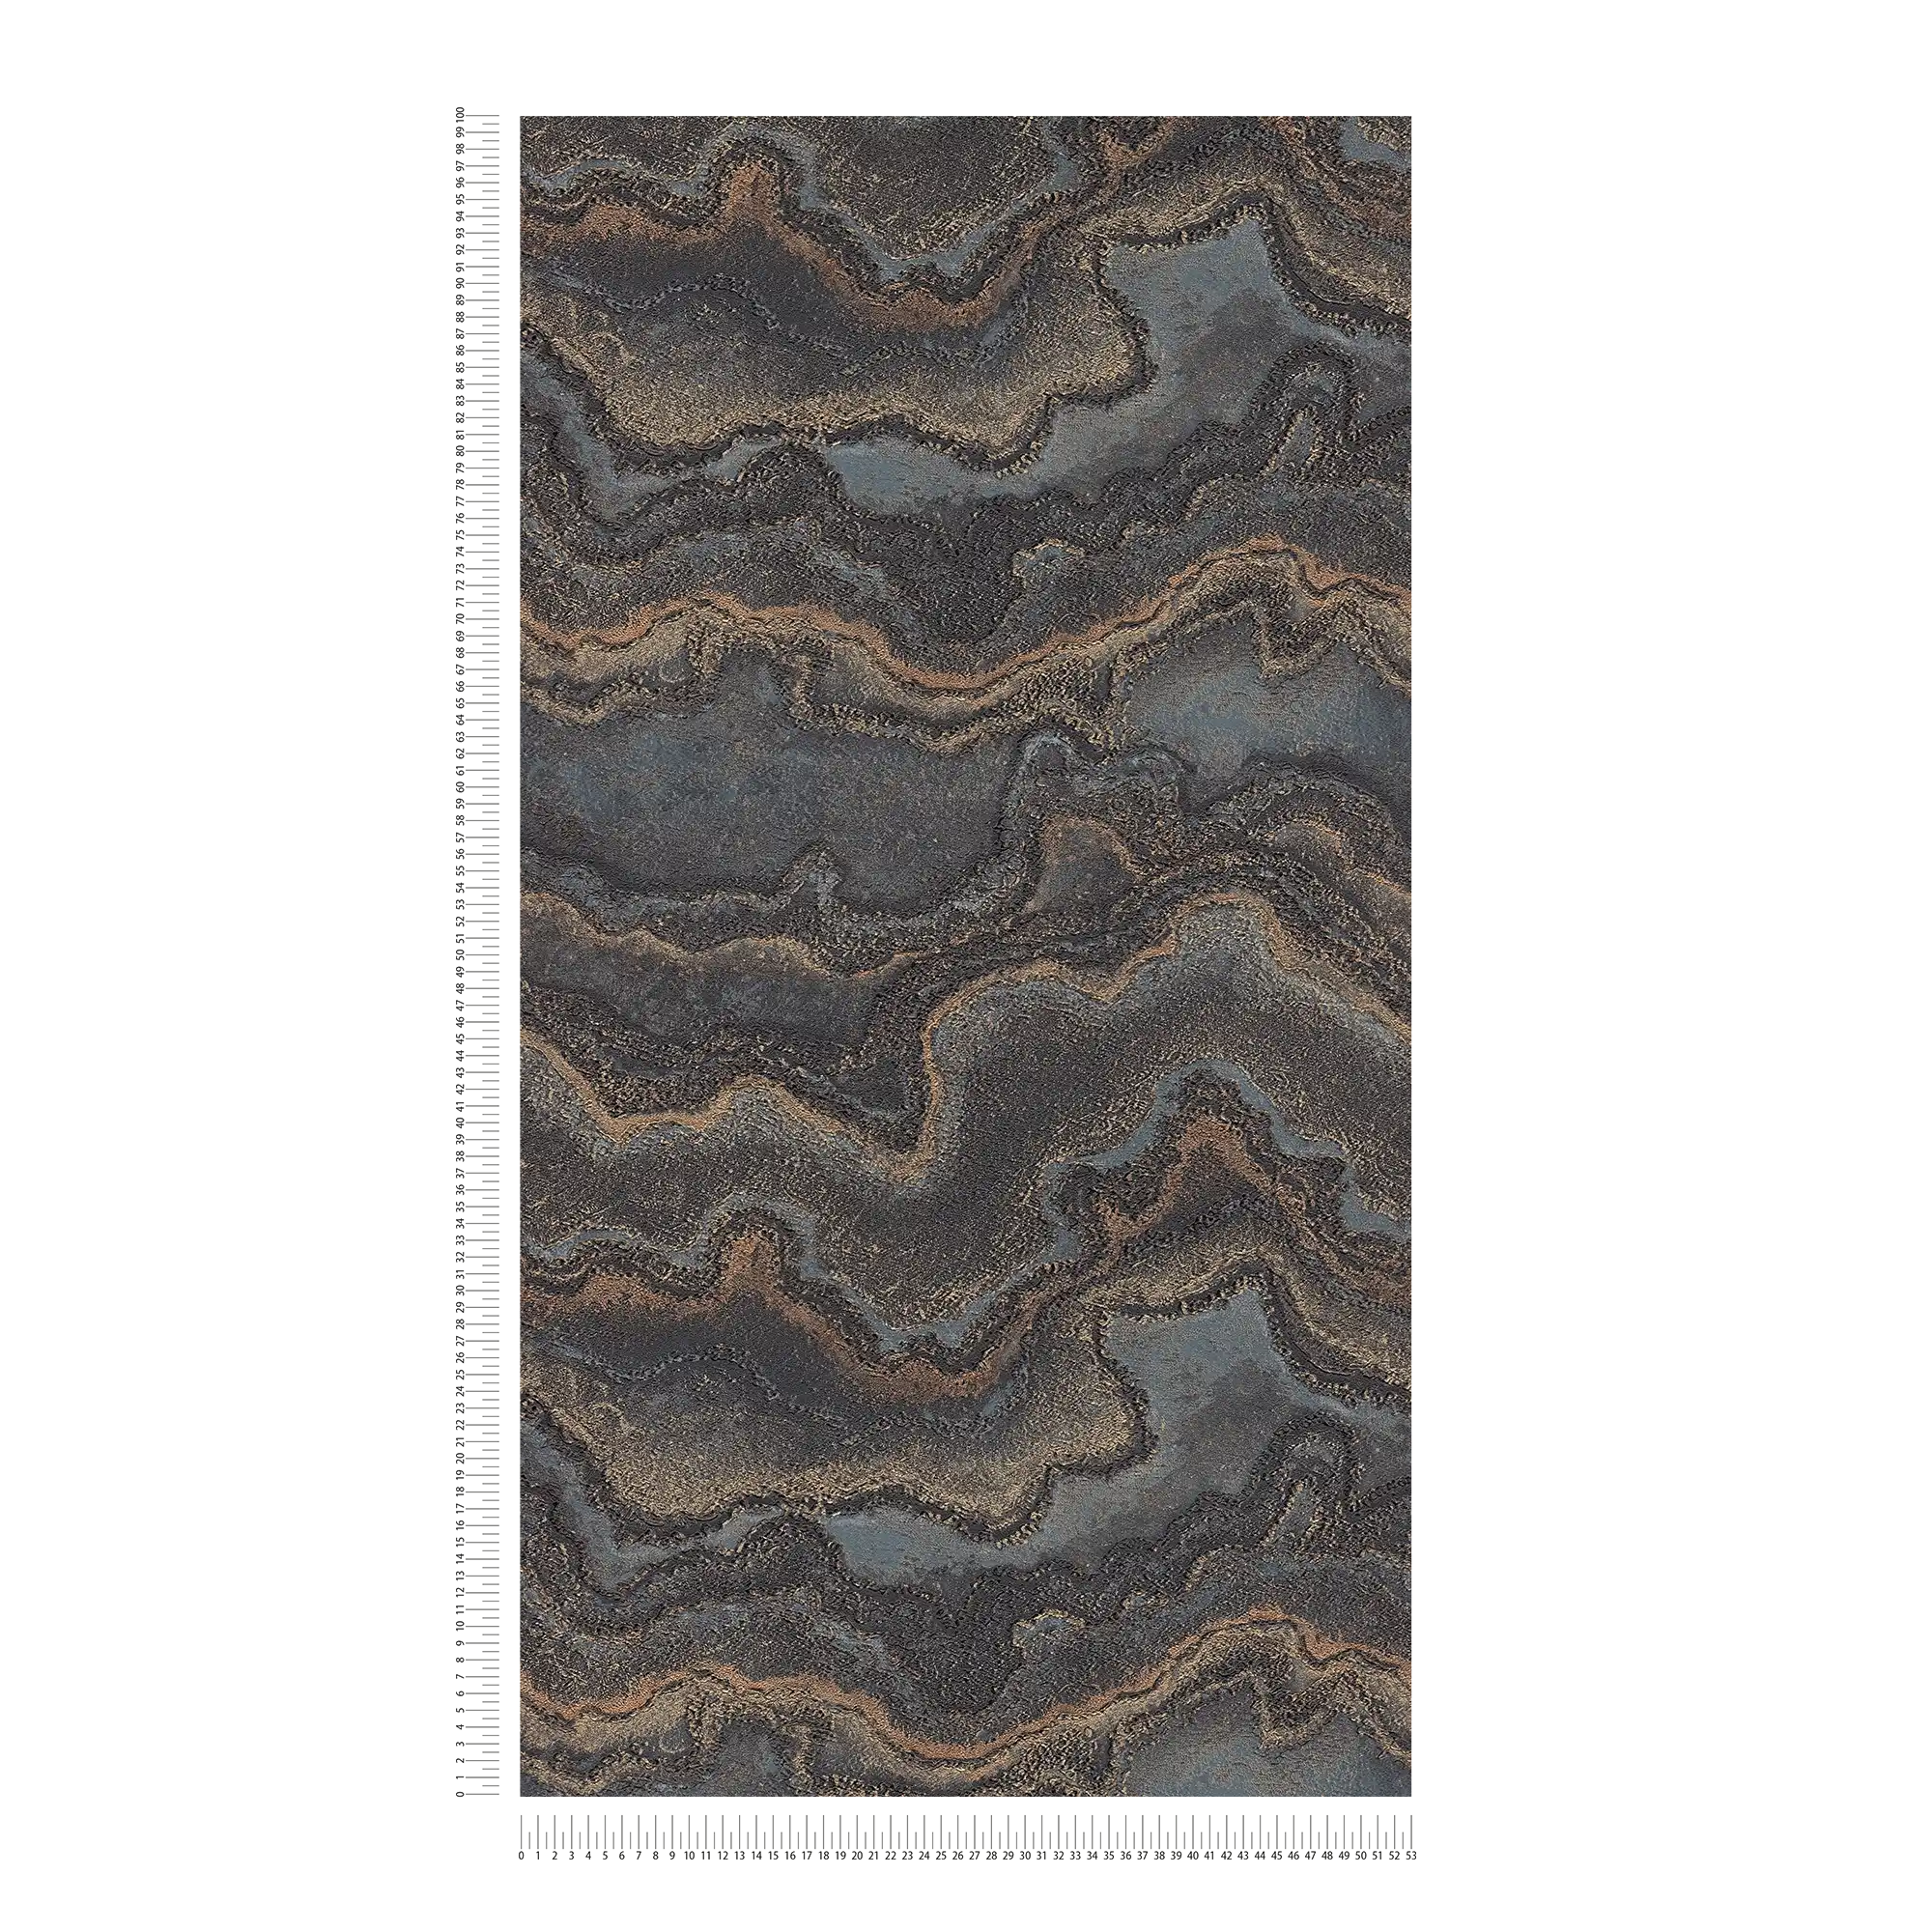             Marbled non-woven wallpaper with gold accents - black, gold
        